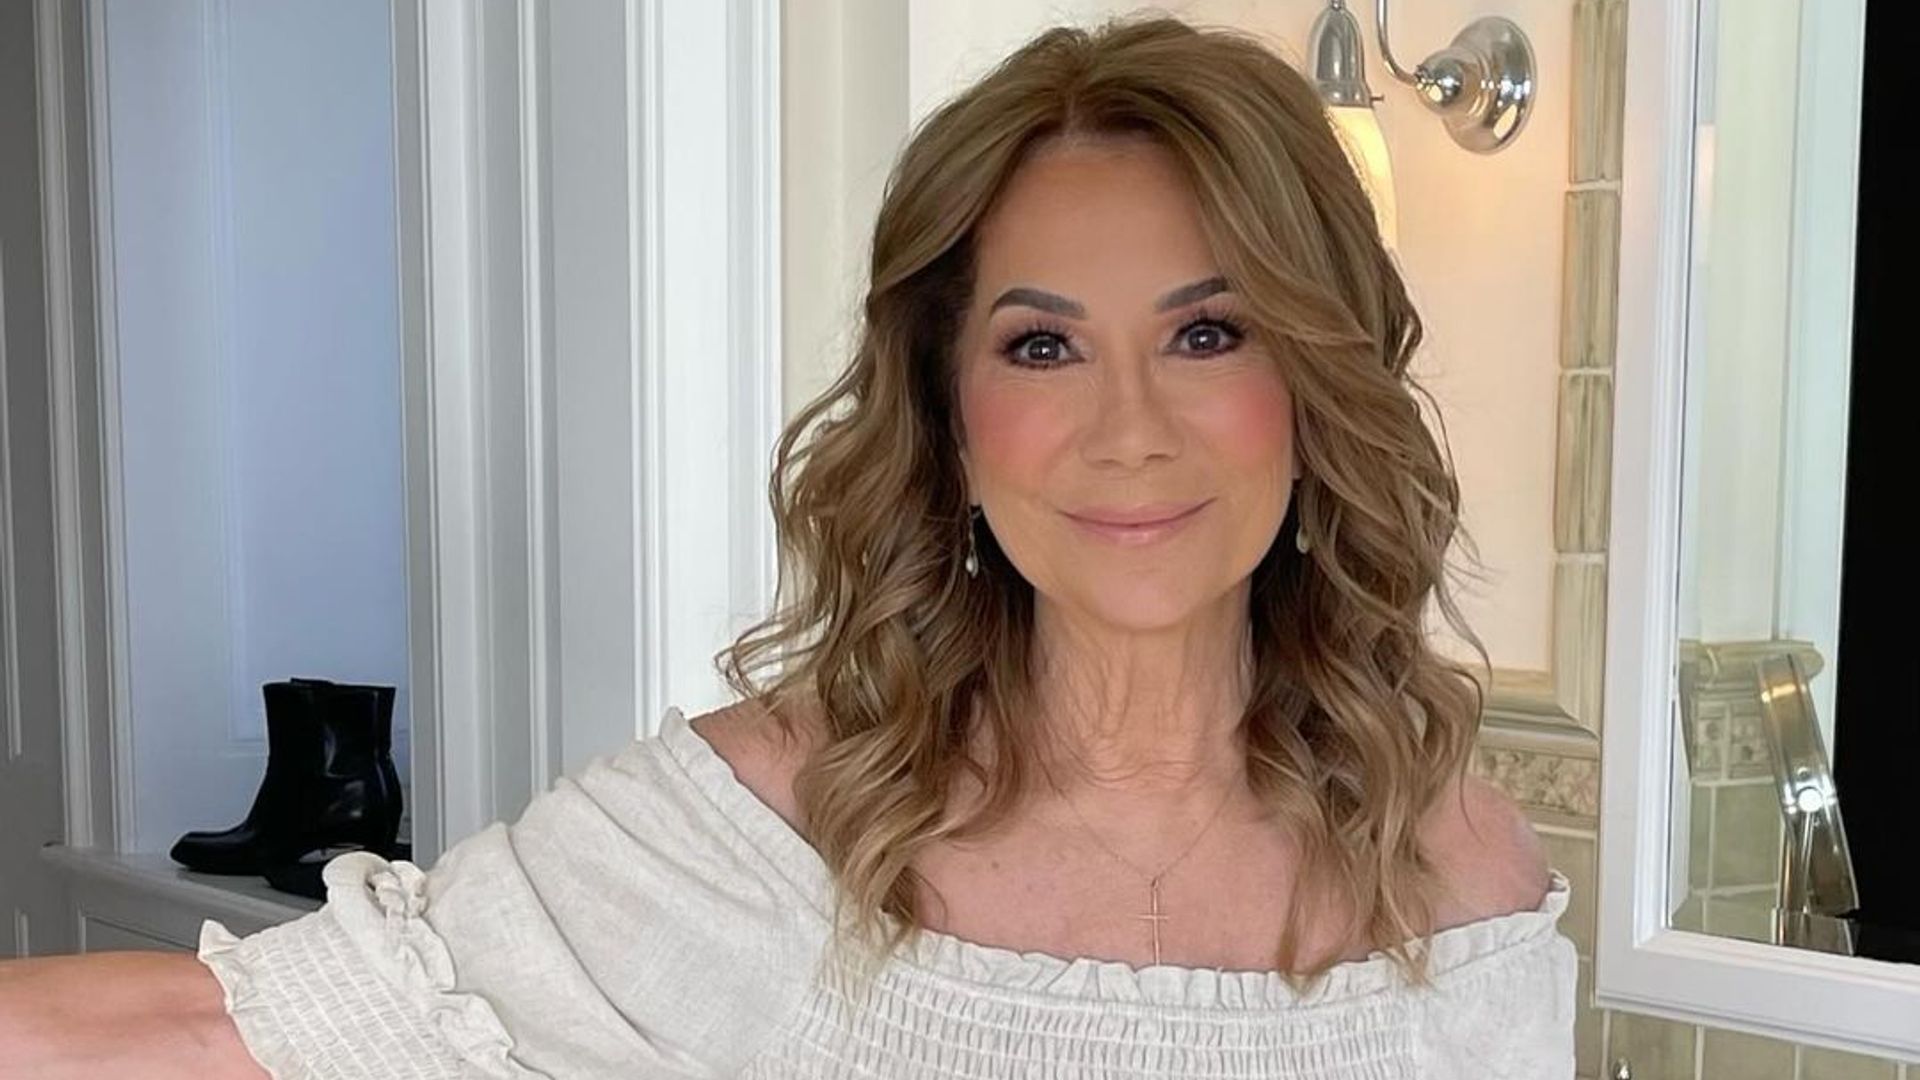 Former Today star Kathie Lee Gifford rocks trend-setting short hair and bangs in flawless throwback photo